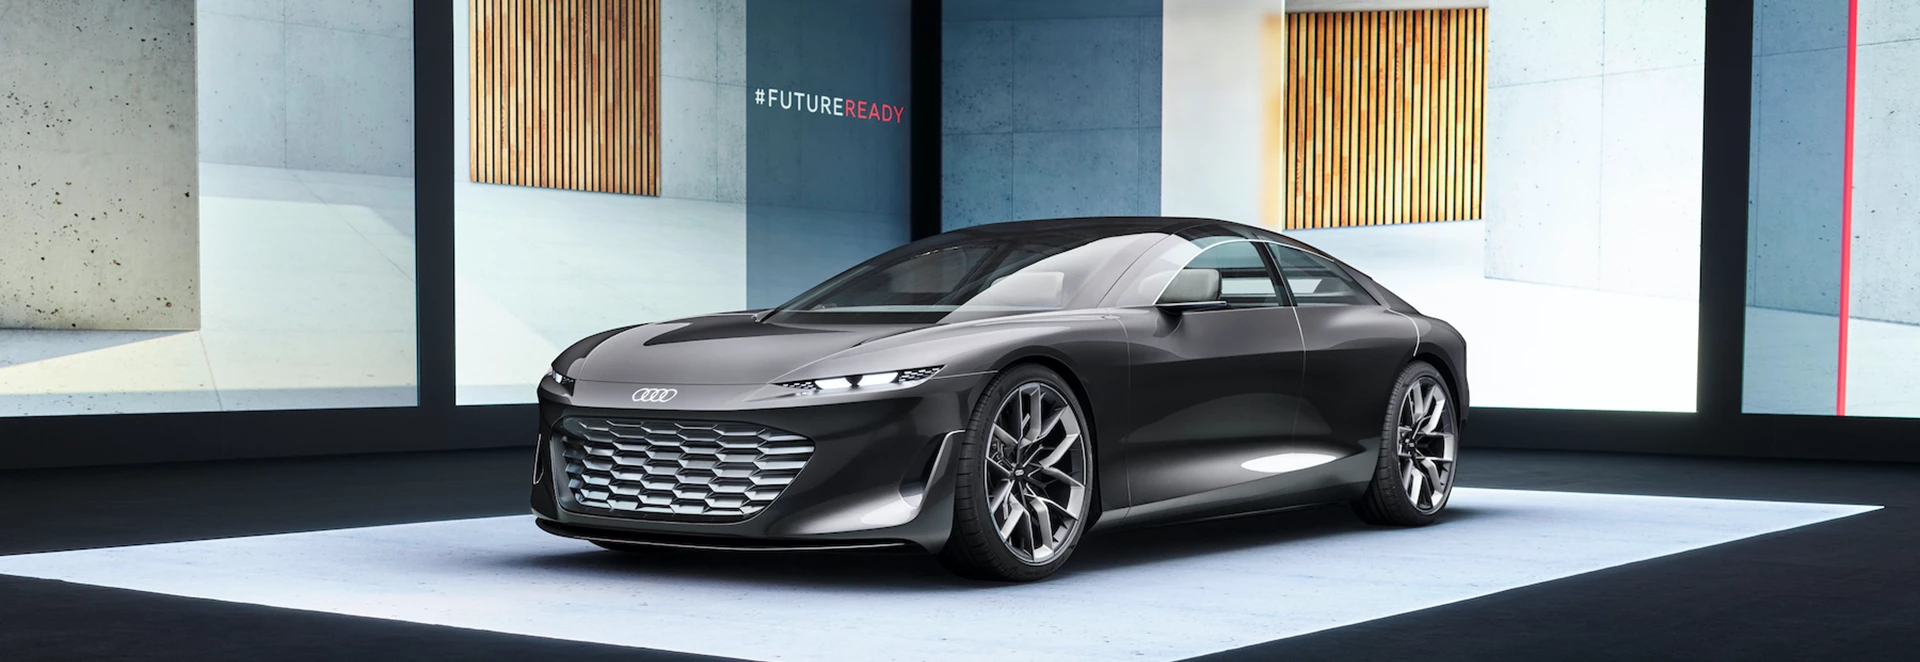 Audi’s Grandsphere concept gives a glimpse at firm’s future 